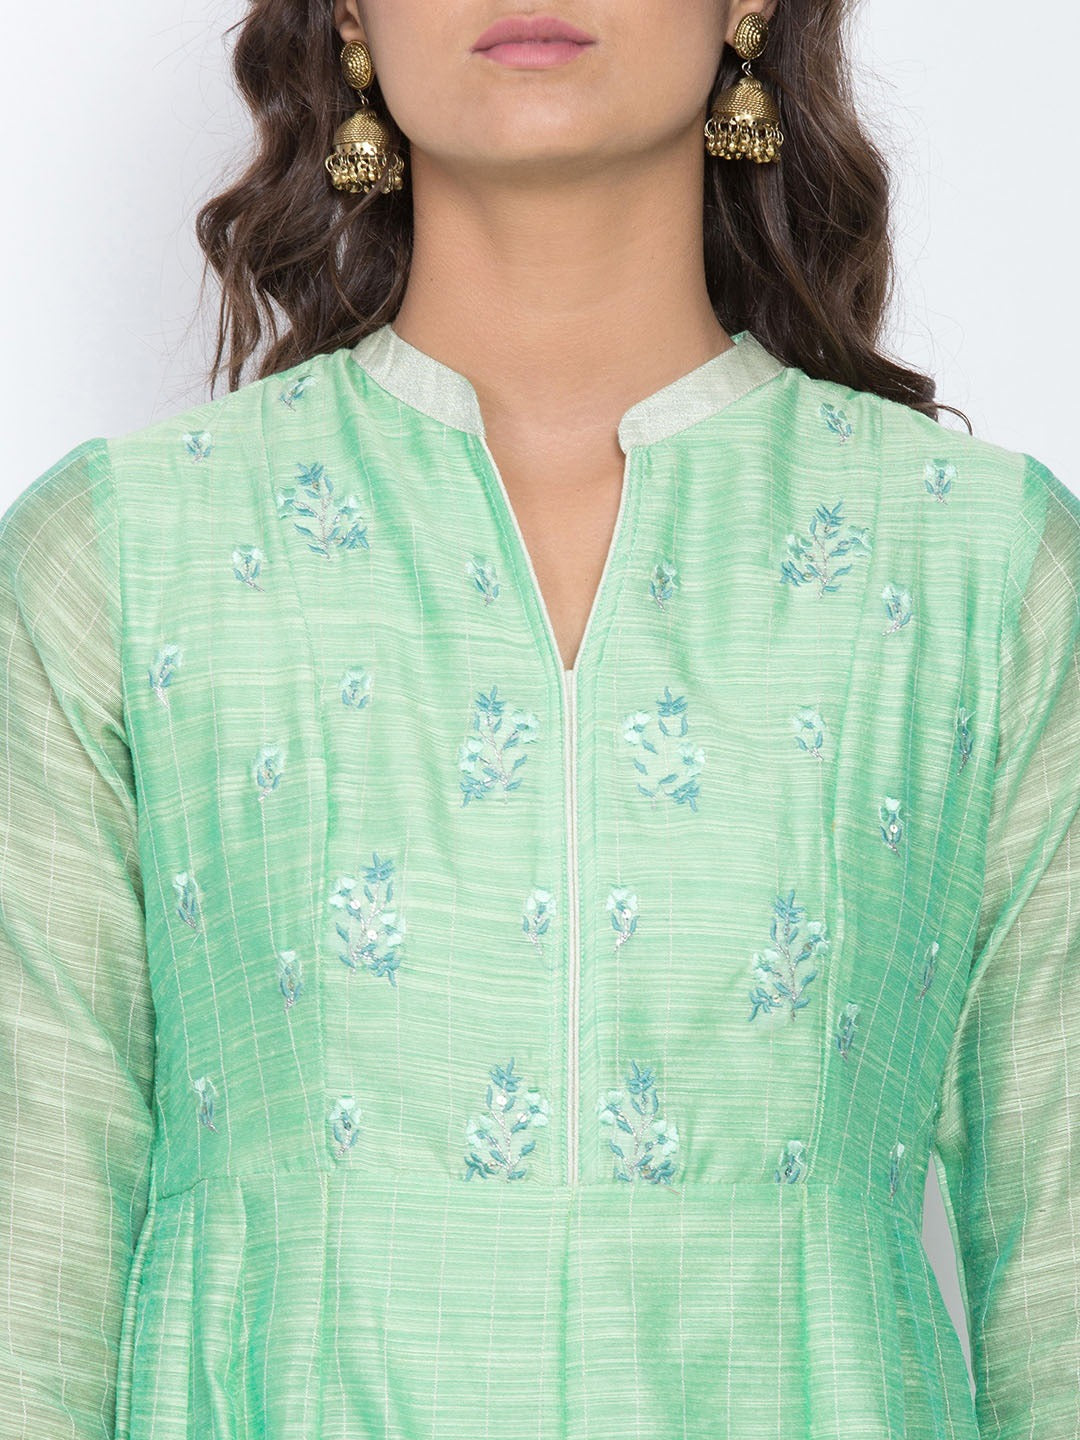 Be Indi Women Green Embroidered A-Line Dress